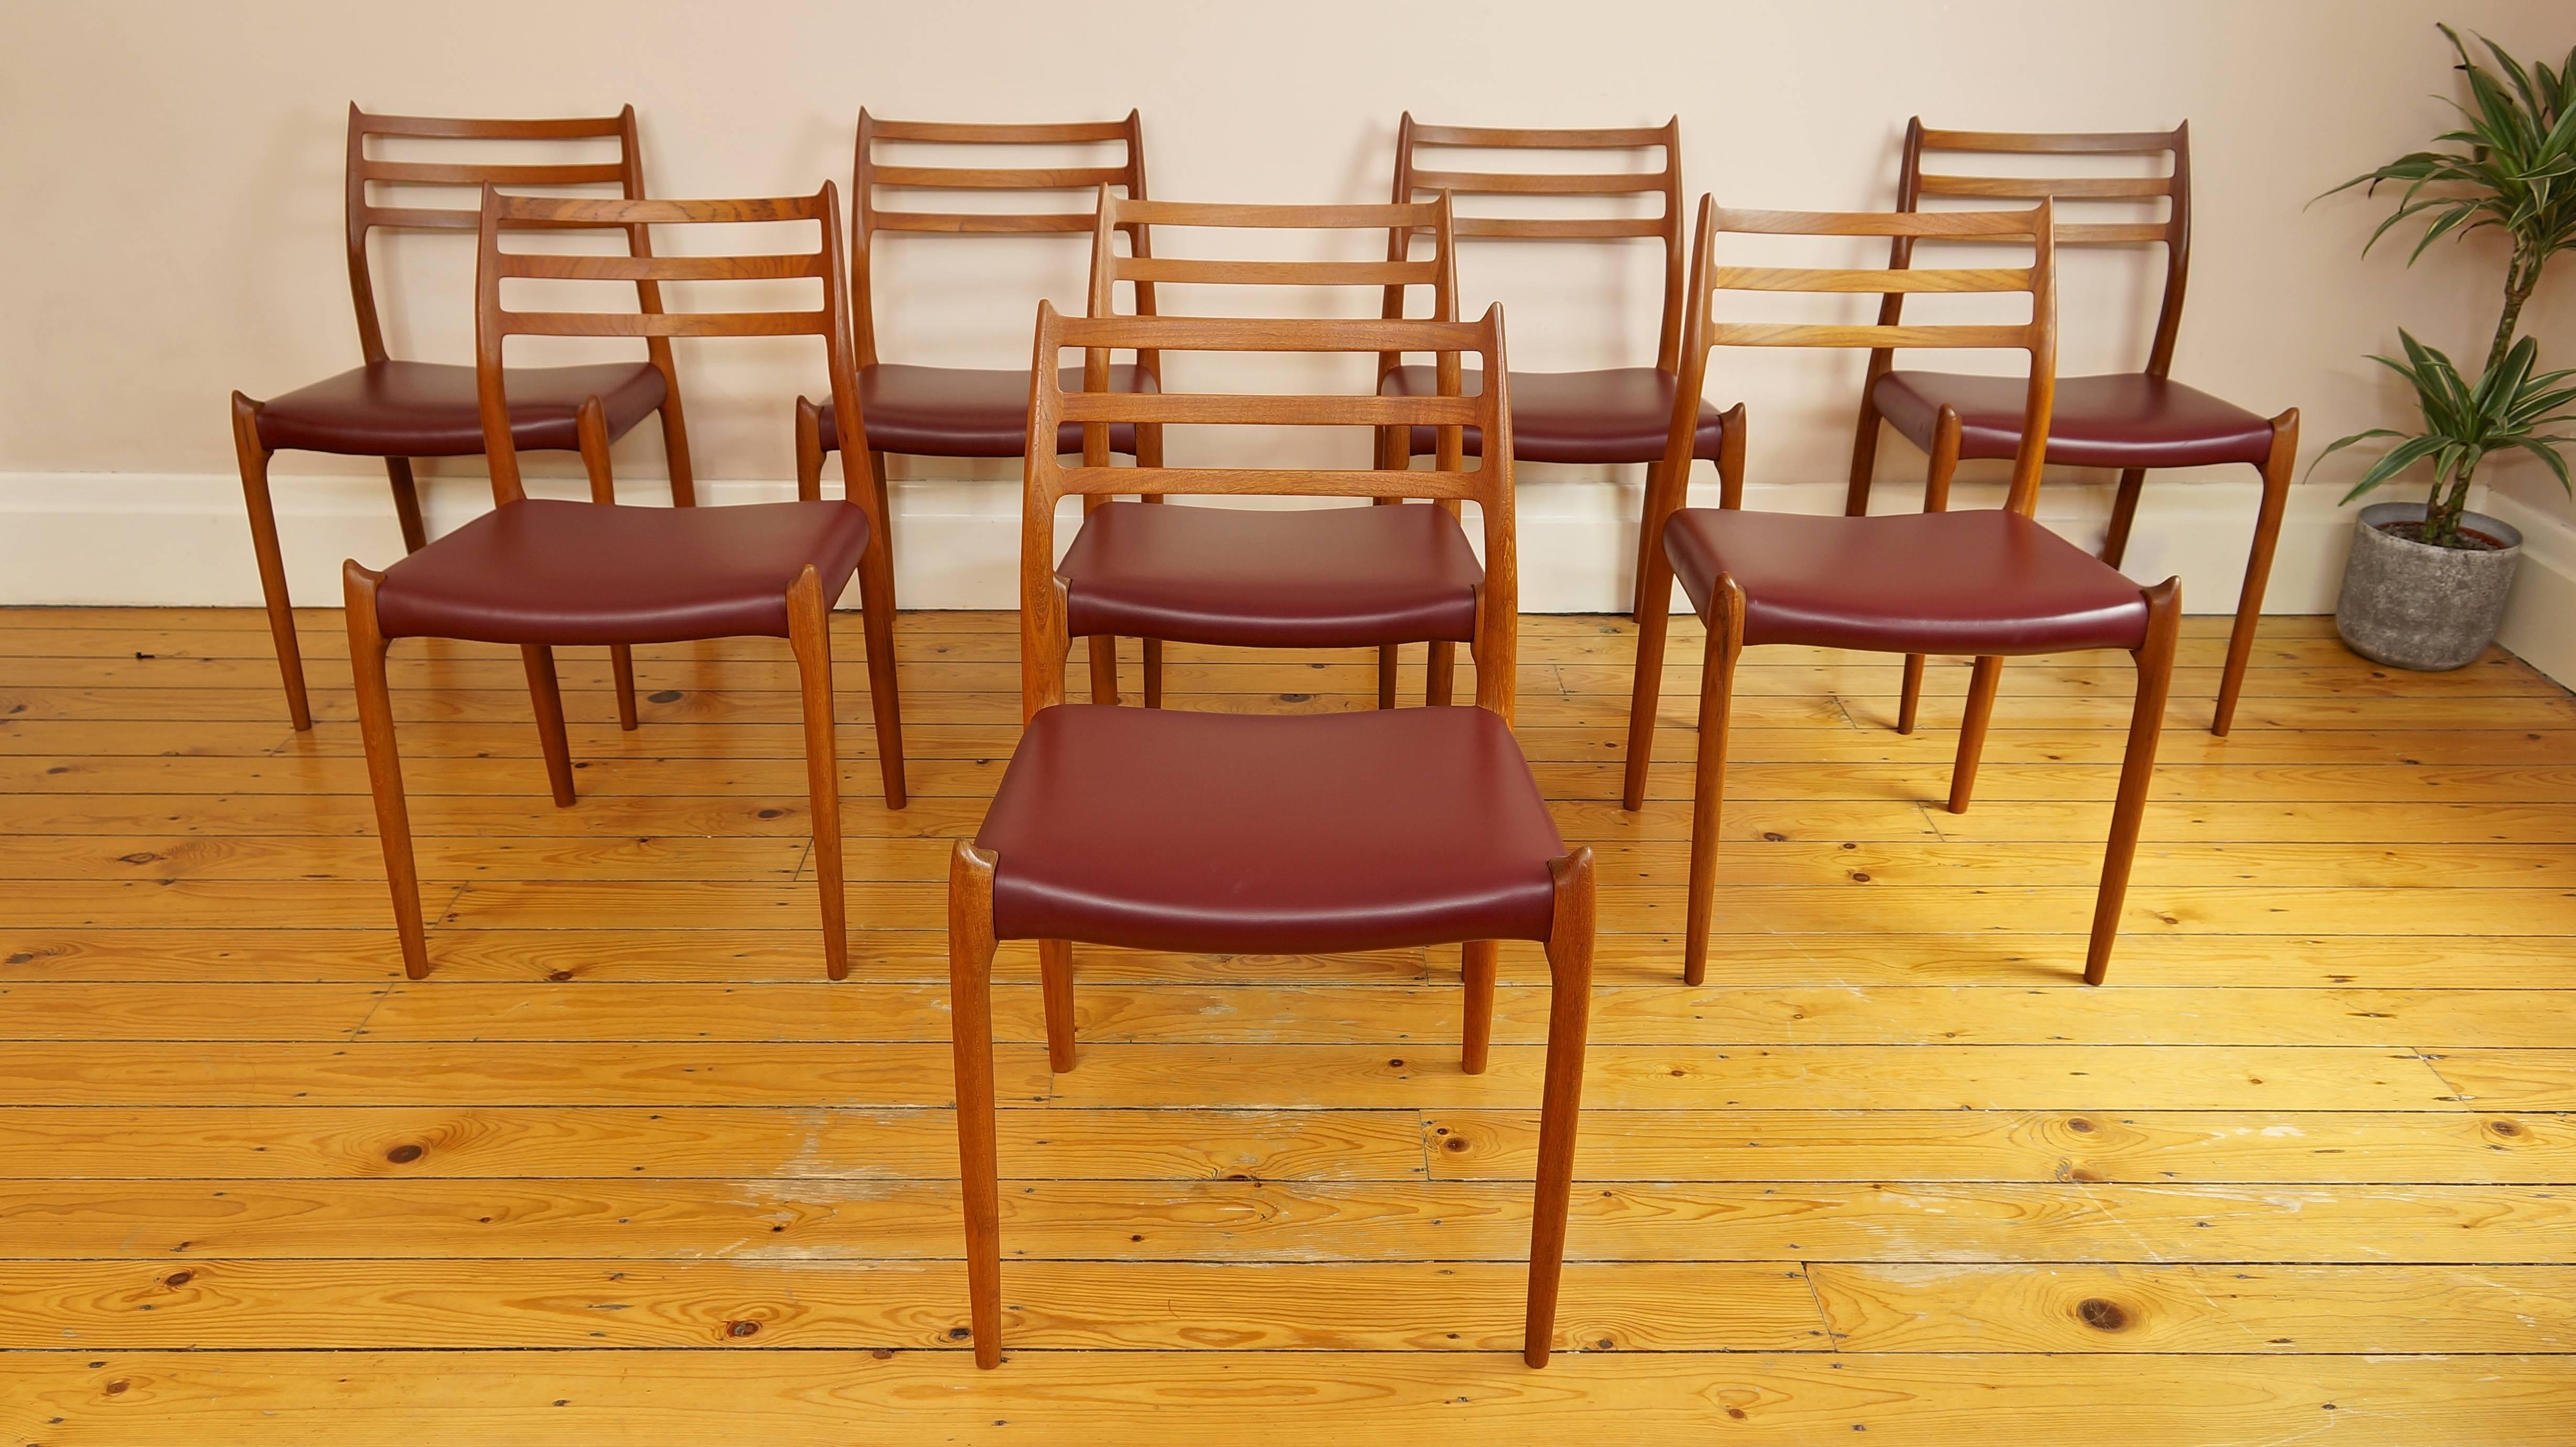 Set of eight Danish model 78 teak and leather dining chairs by Niels Otto Møller for J.l. Mollers Mobelfabrik, Denmark.
Design year: 1962.

Incredibly high quality model 78 side chair designed by Niels Otto Møller for J.L. Mollers